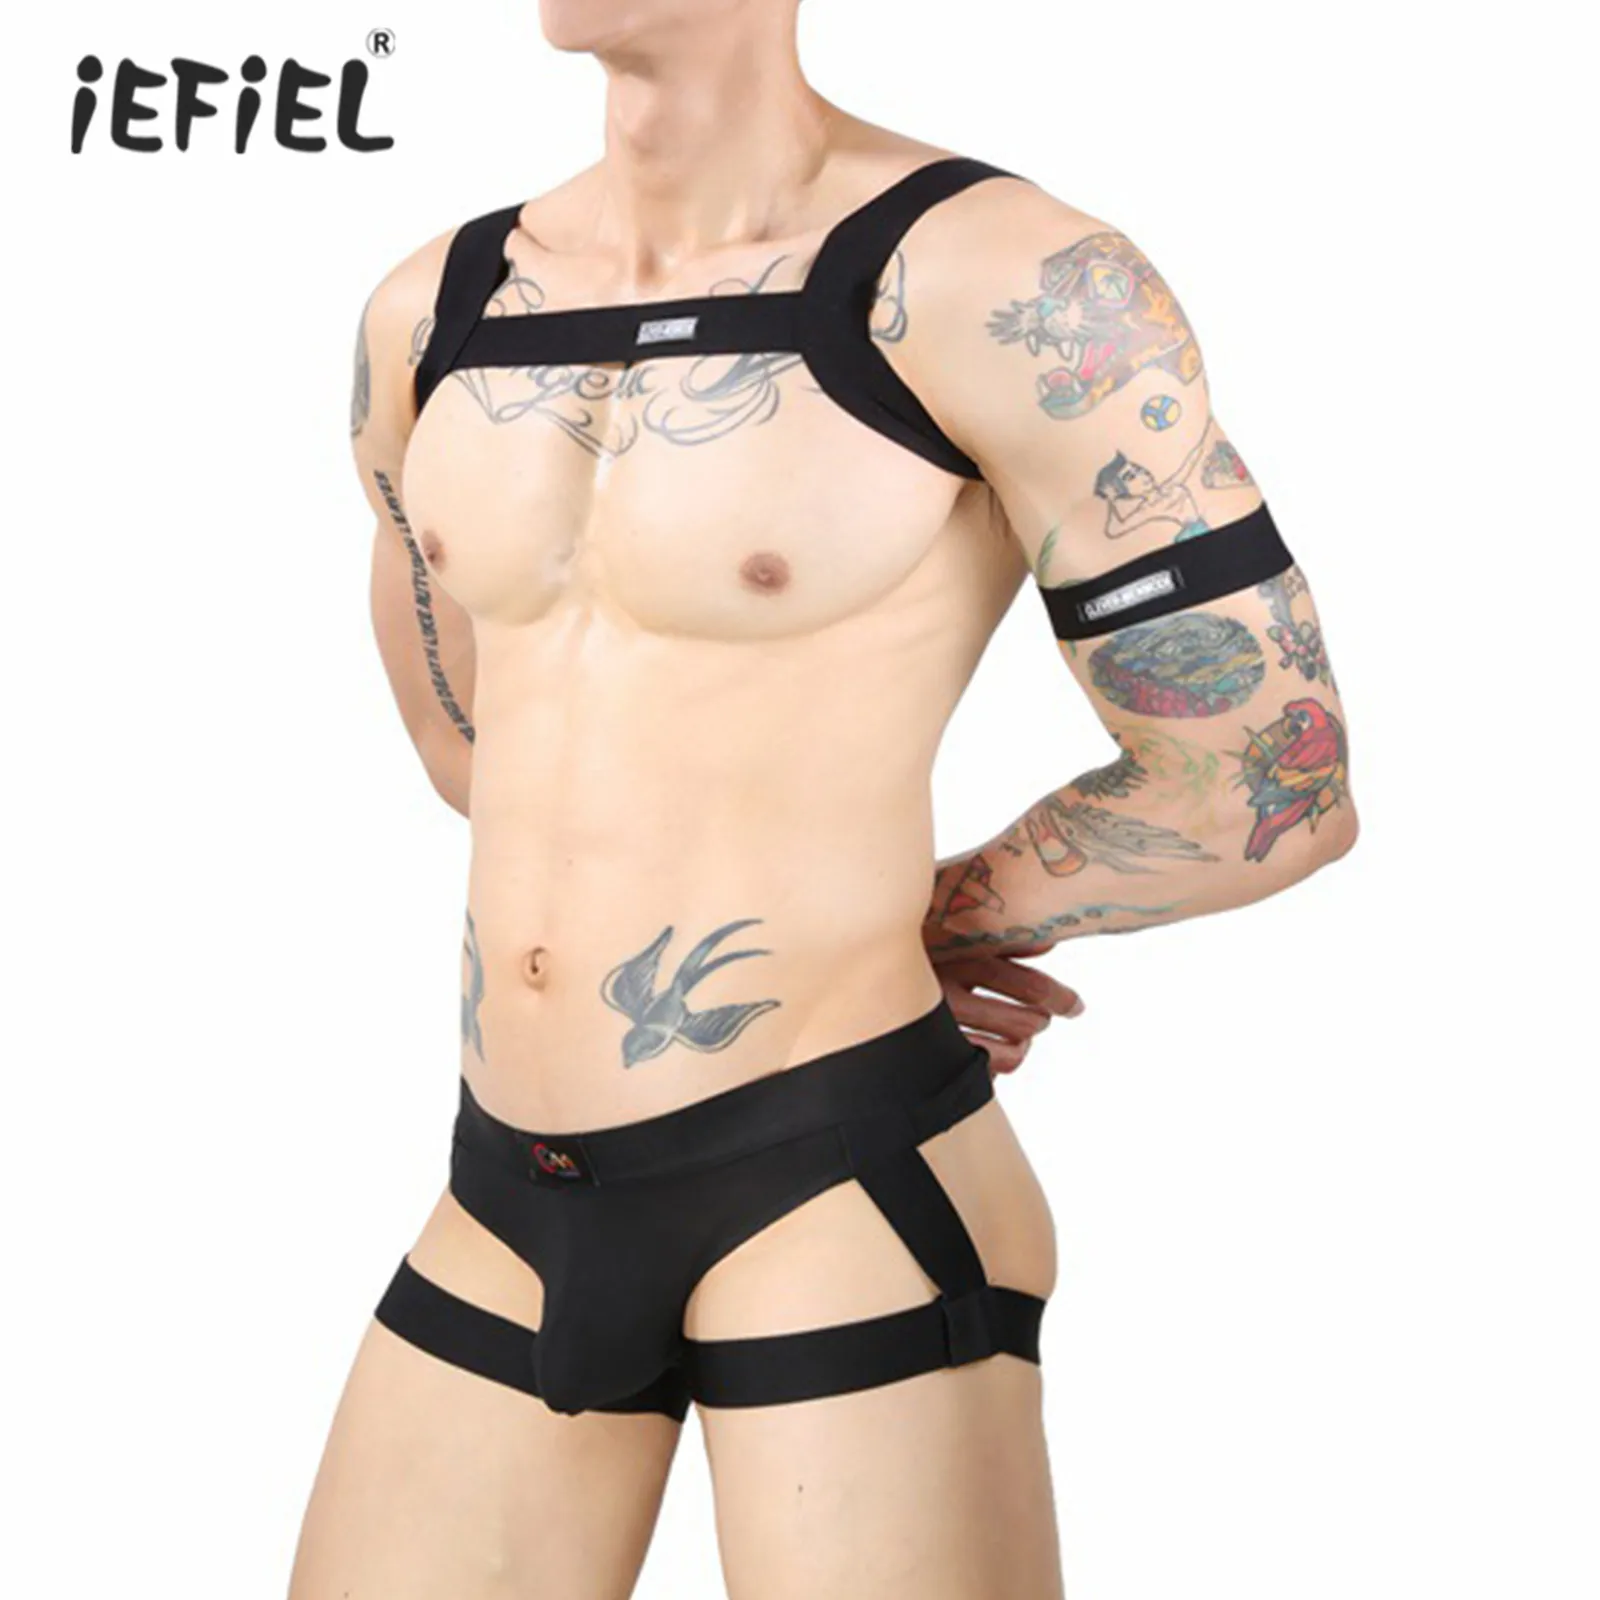 

Mens Erotic Lingerie Suit Nightclub Stage Performance Costume Shoulder Chest Harness Belt Tank Top with Garter Briefs Armband